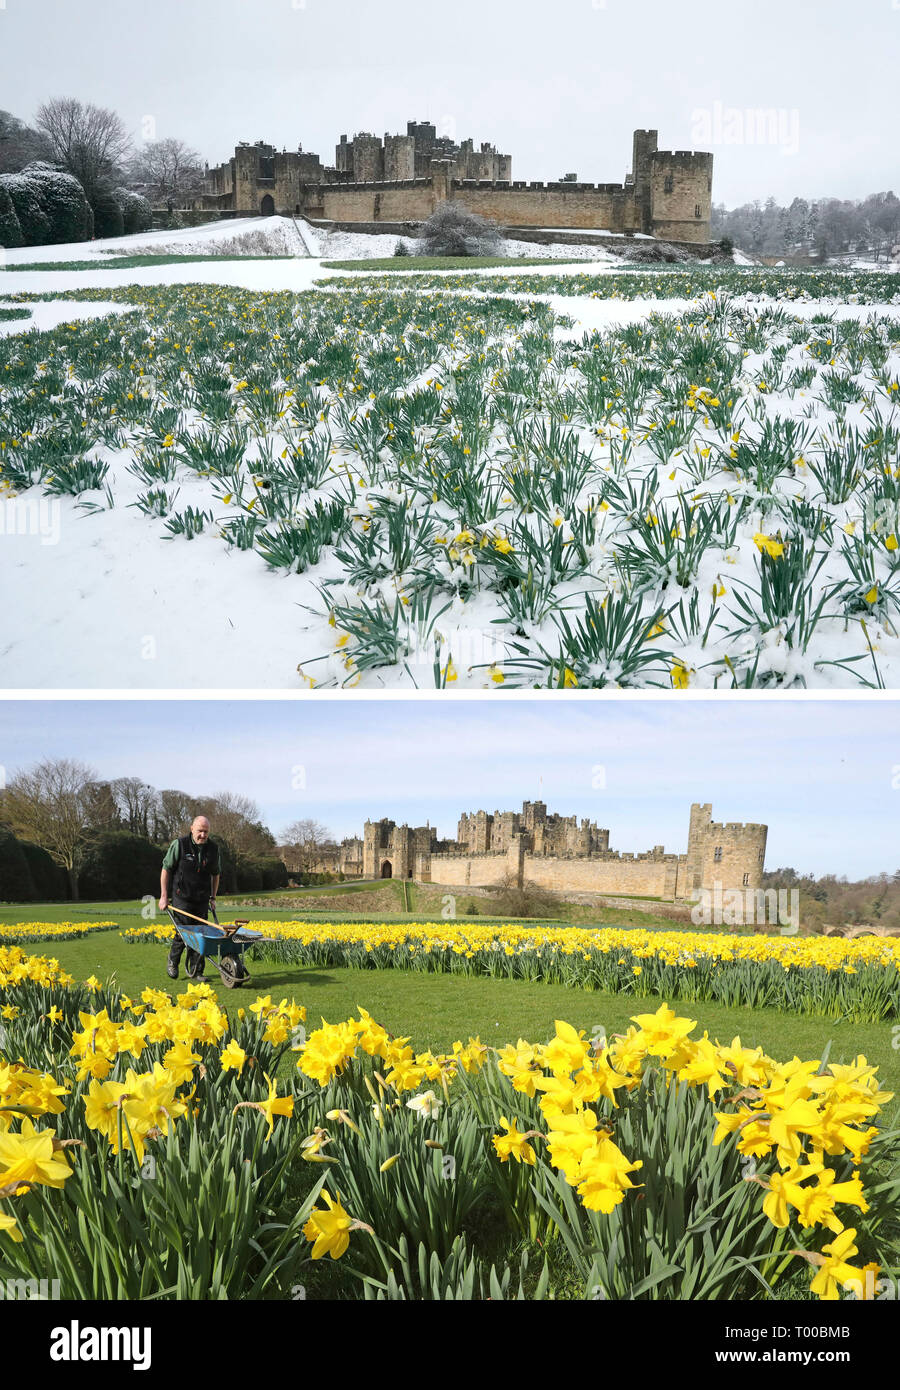 Composite photos of Alnwick Castle, Northumberland on 16/03/2019 (top) and 24/03/2017 (bottom) as a late blast of wintry weather will affect most parts of the UK this weekend. Stock Photo